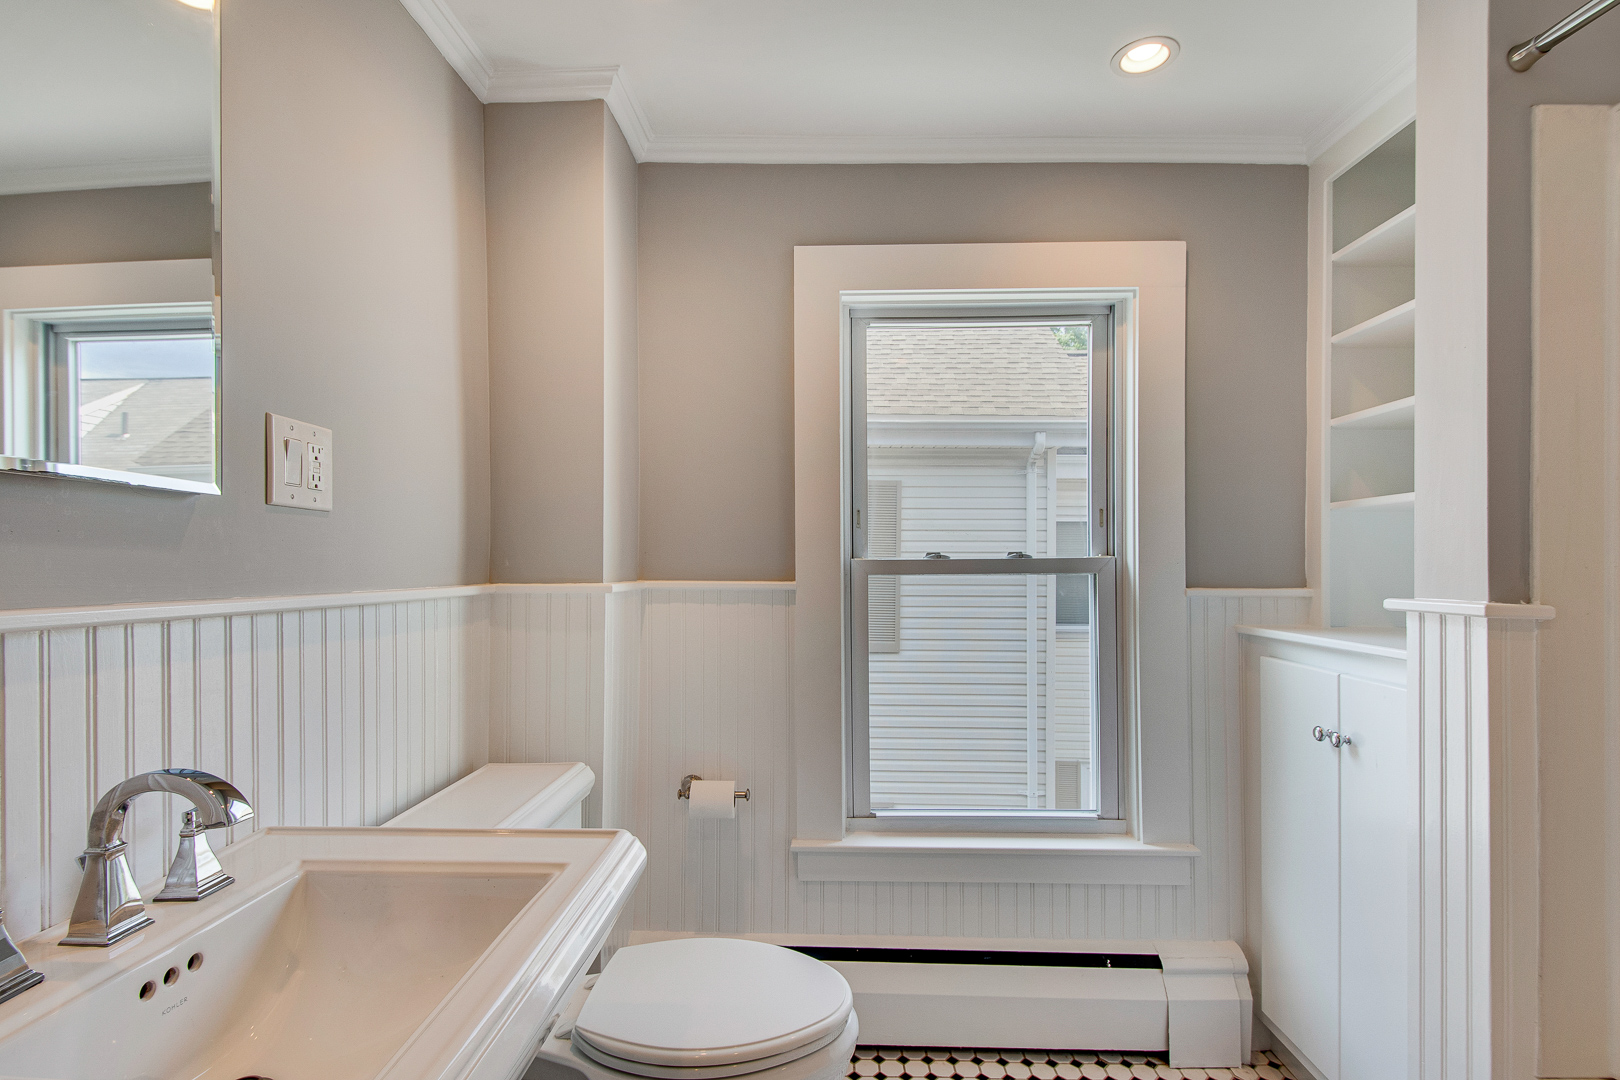 Thomas Adach - Somerville MA professional real estate photographer - 508-655-2225 Home Listing Photography